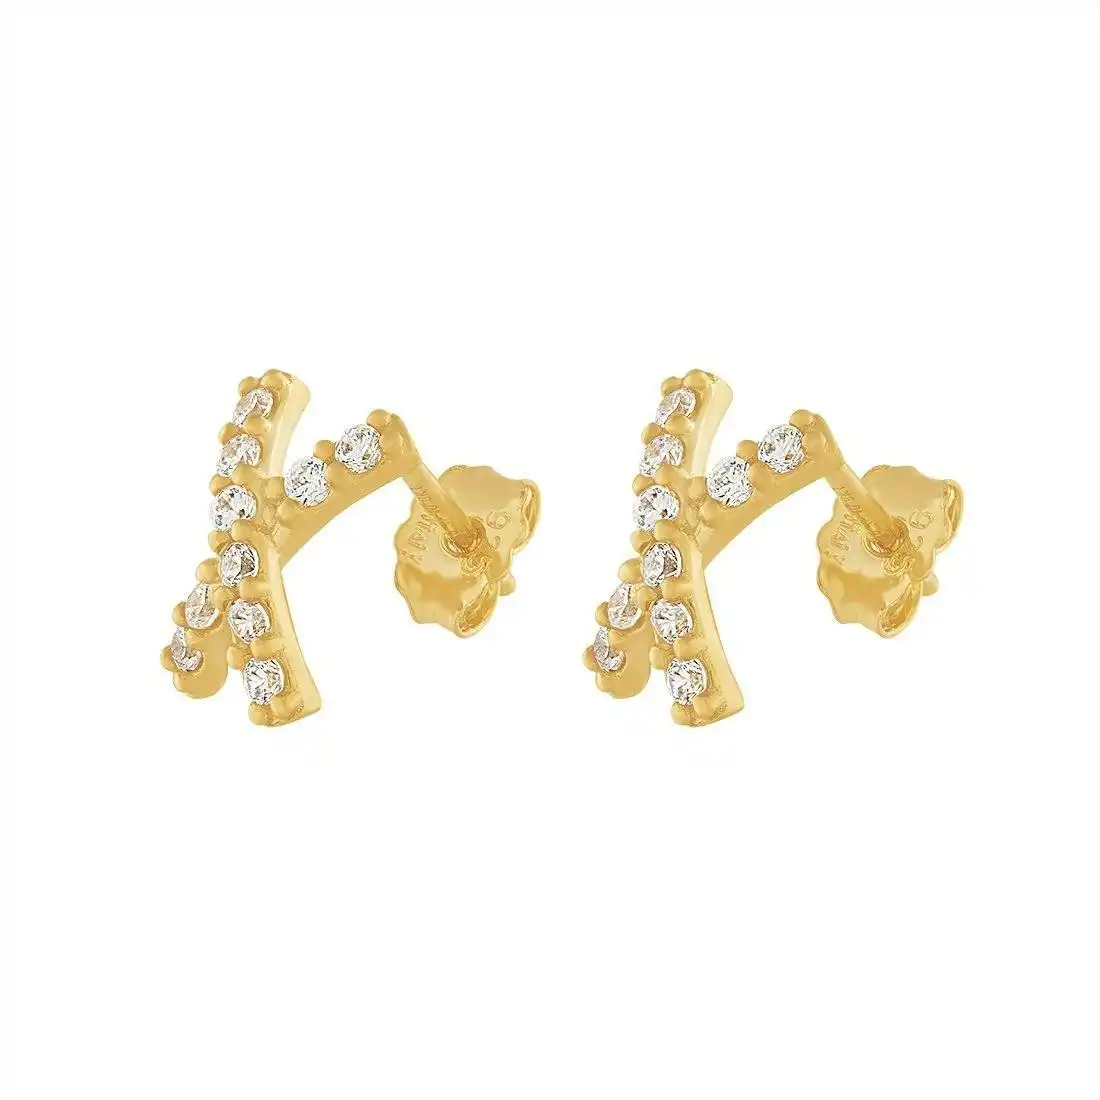 9ct Yellow Gold Silver Infused Stud Earrings with Cubic Zircona